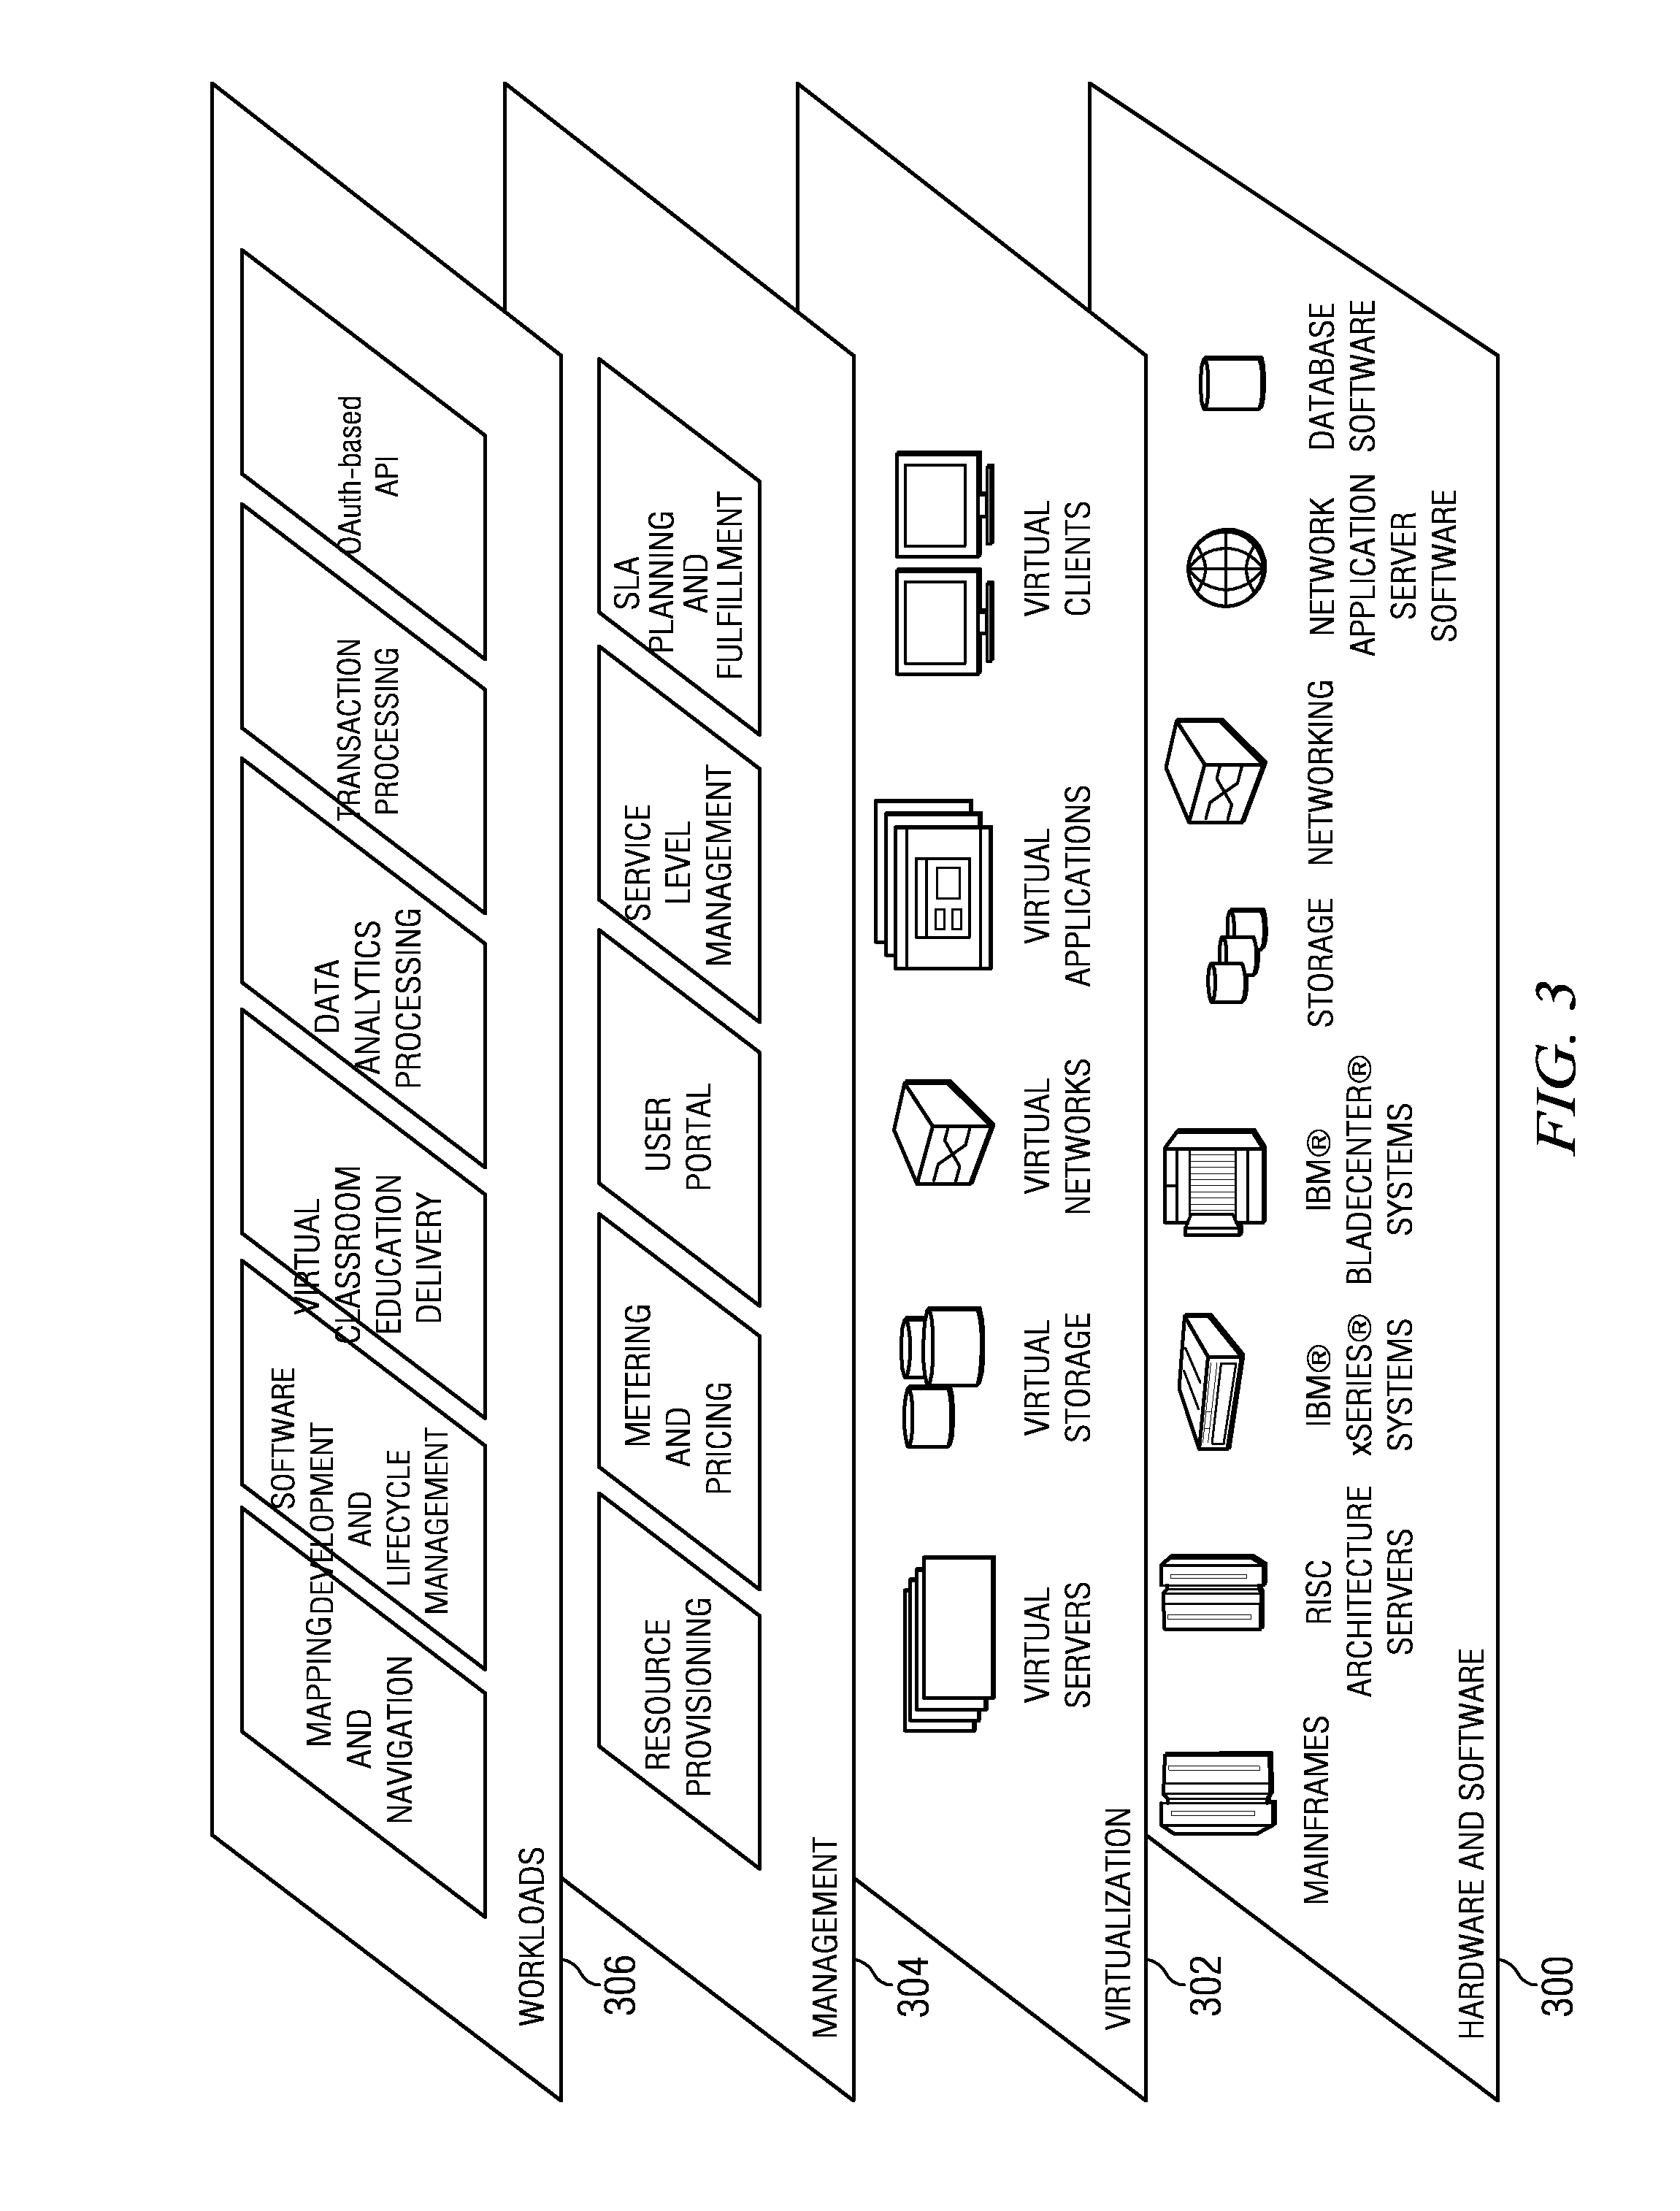 User impersonation/delegation in a token-based authentication system